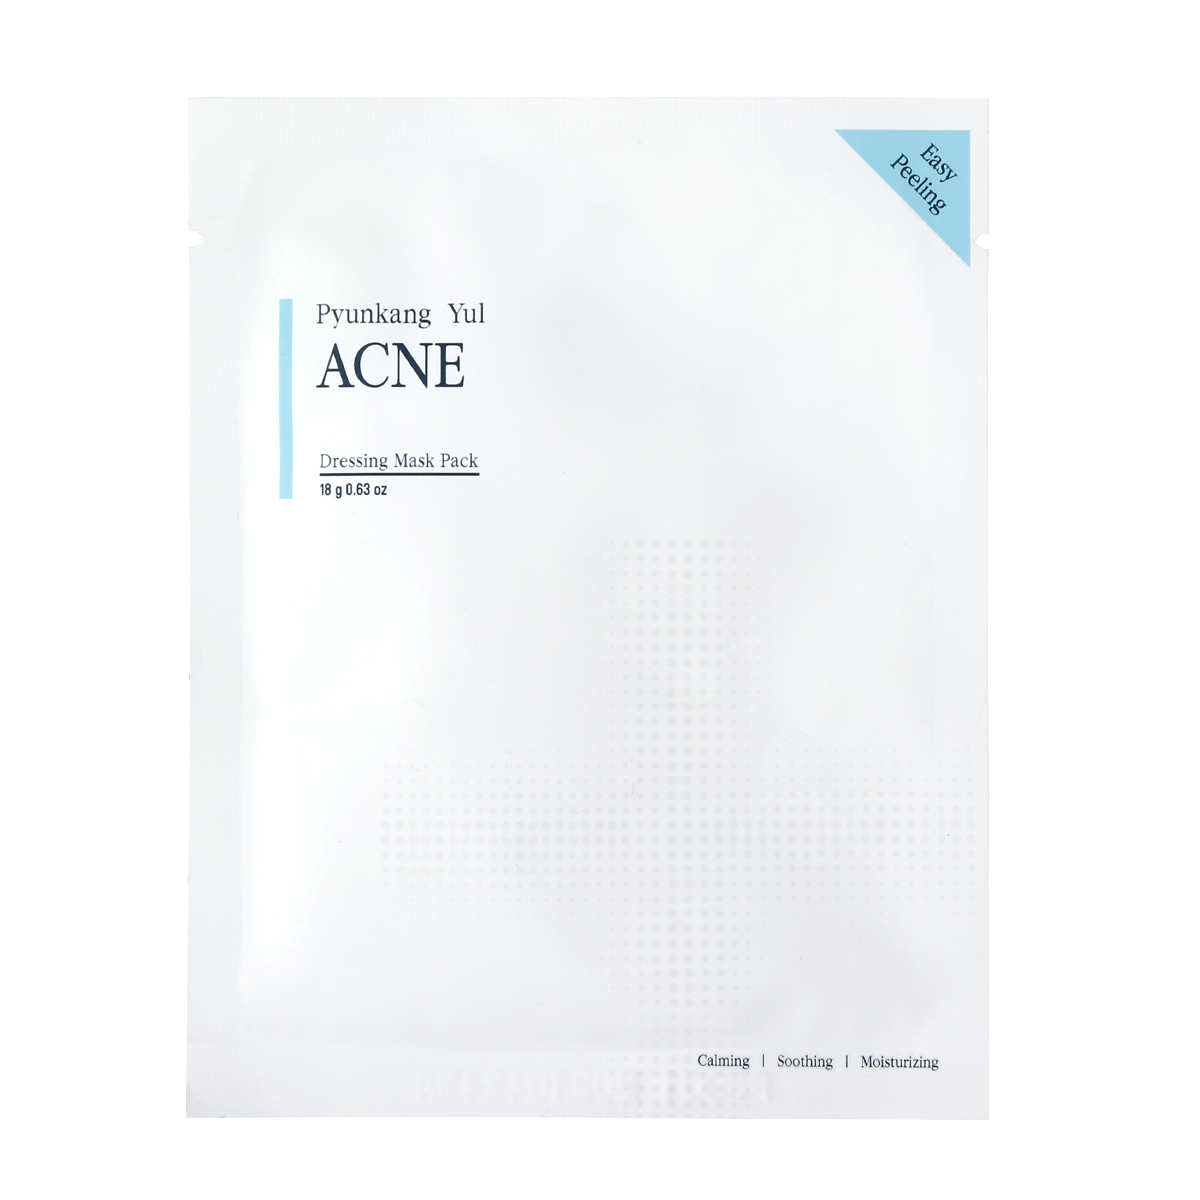 Acne Dressing Mask Pack 4 sheets